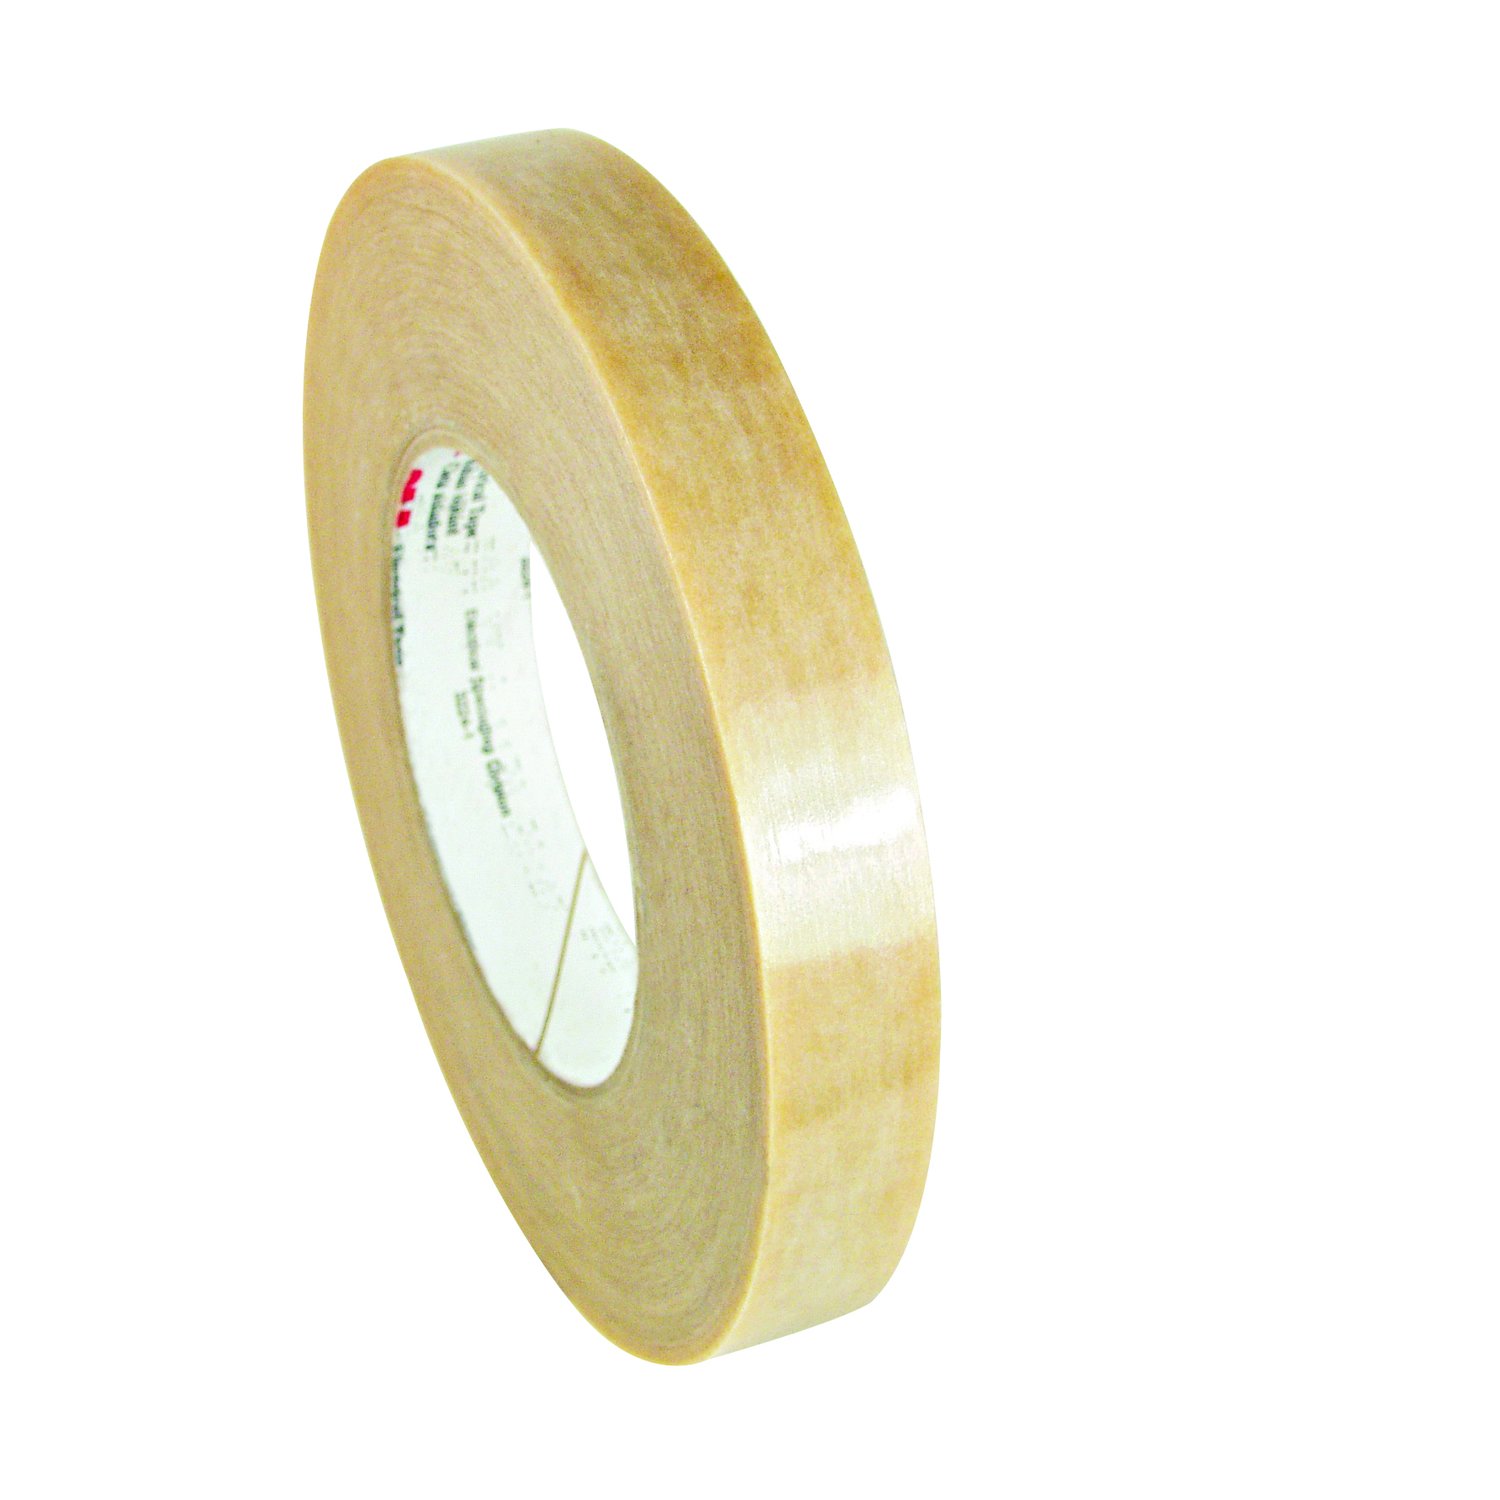 7010045338 - 3M Polyester Film Electrical Tape 58, 3/4 in X 72 yd, Clear, 48
Rolls/Case